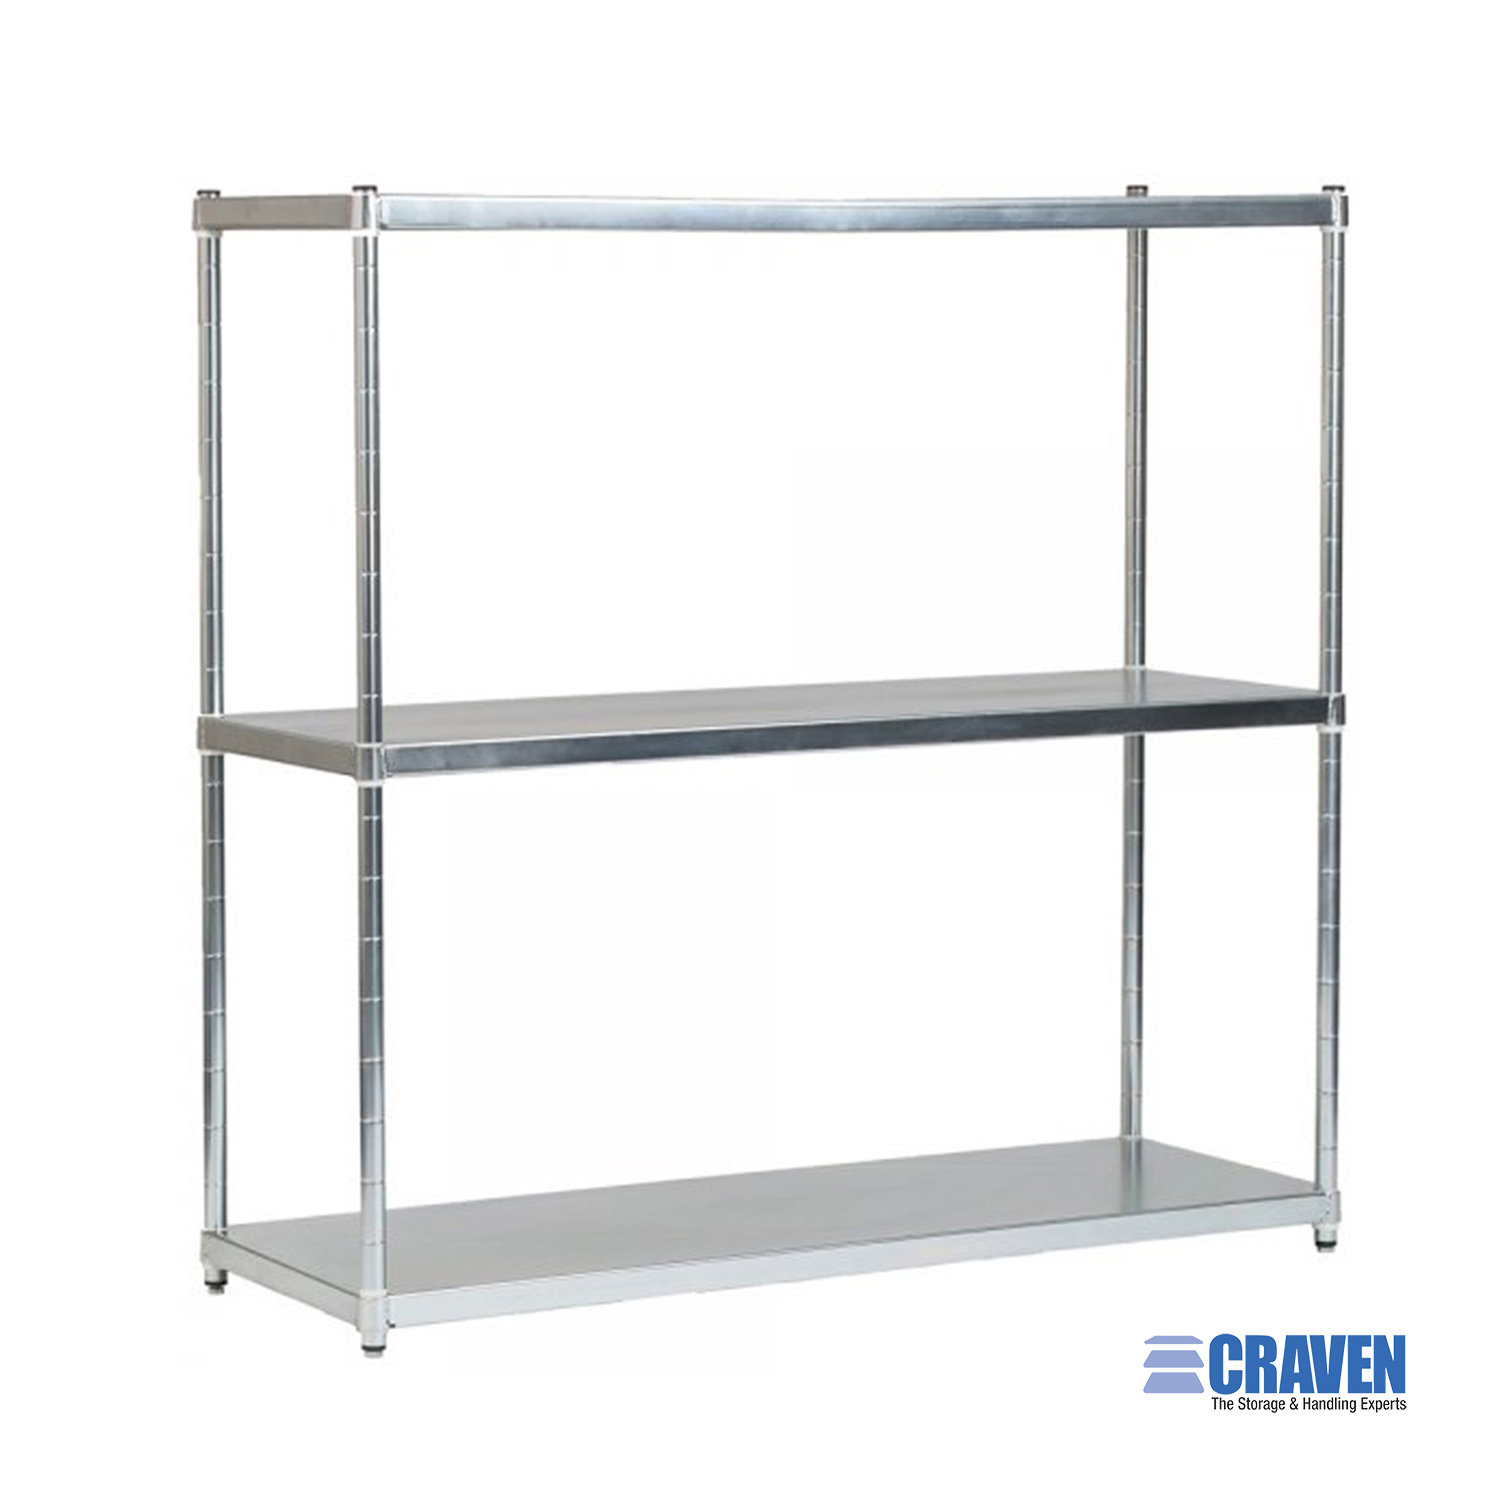 Stainless Steel Solid Shelving Craven, Sam’s Club Metal Shelving